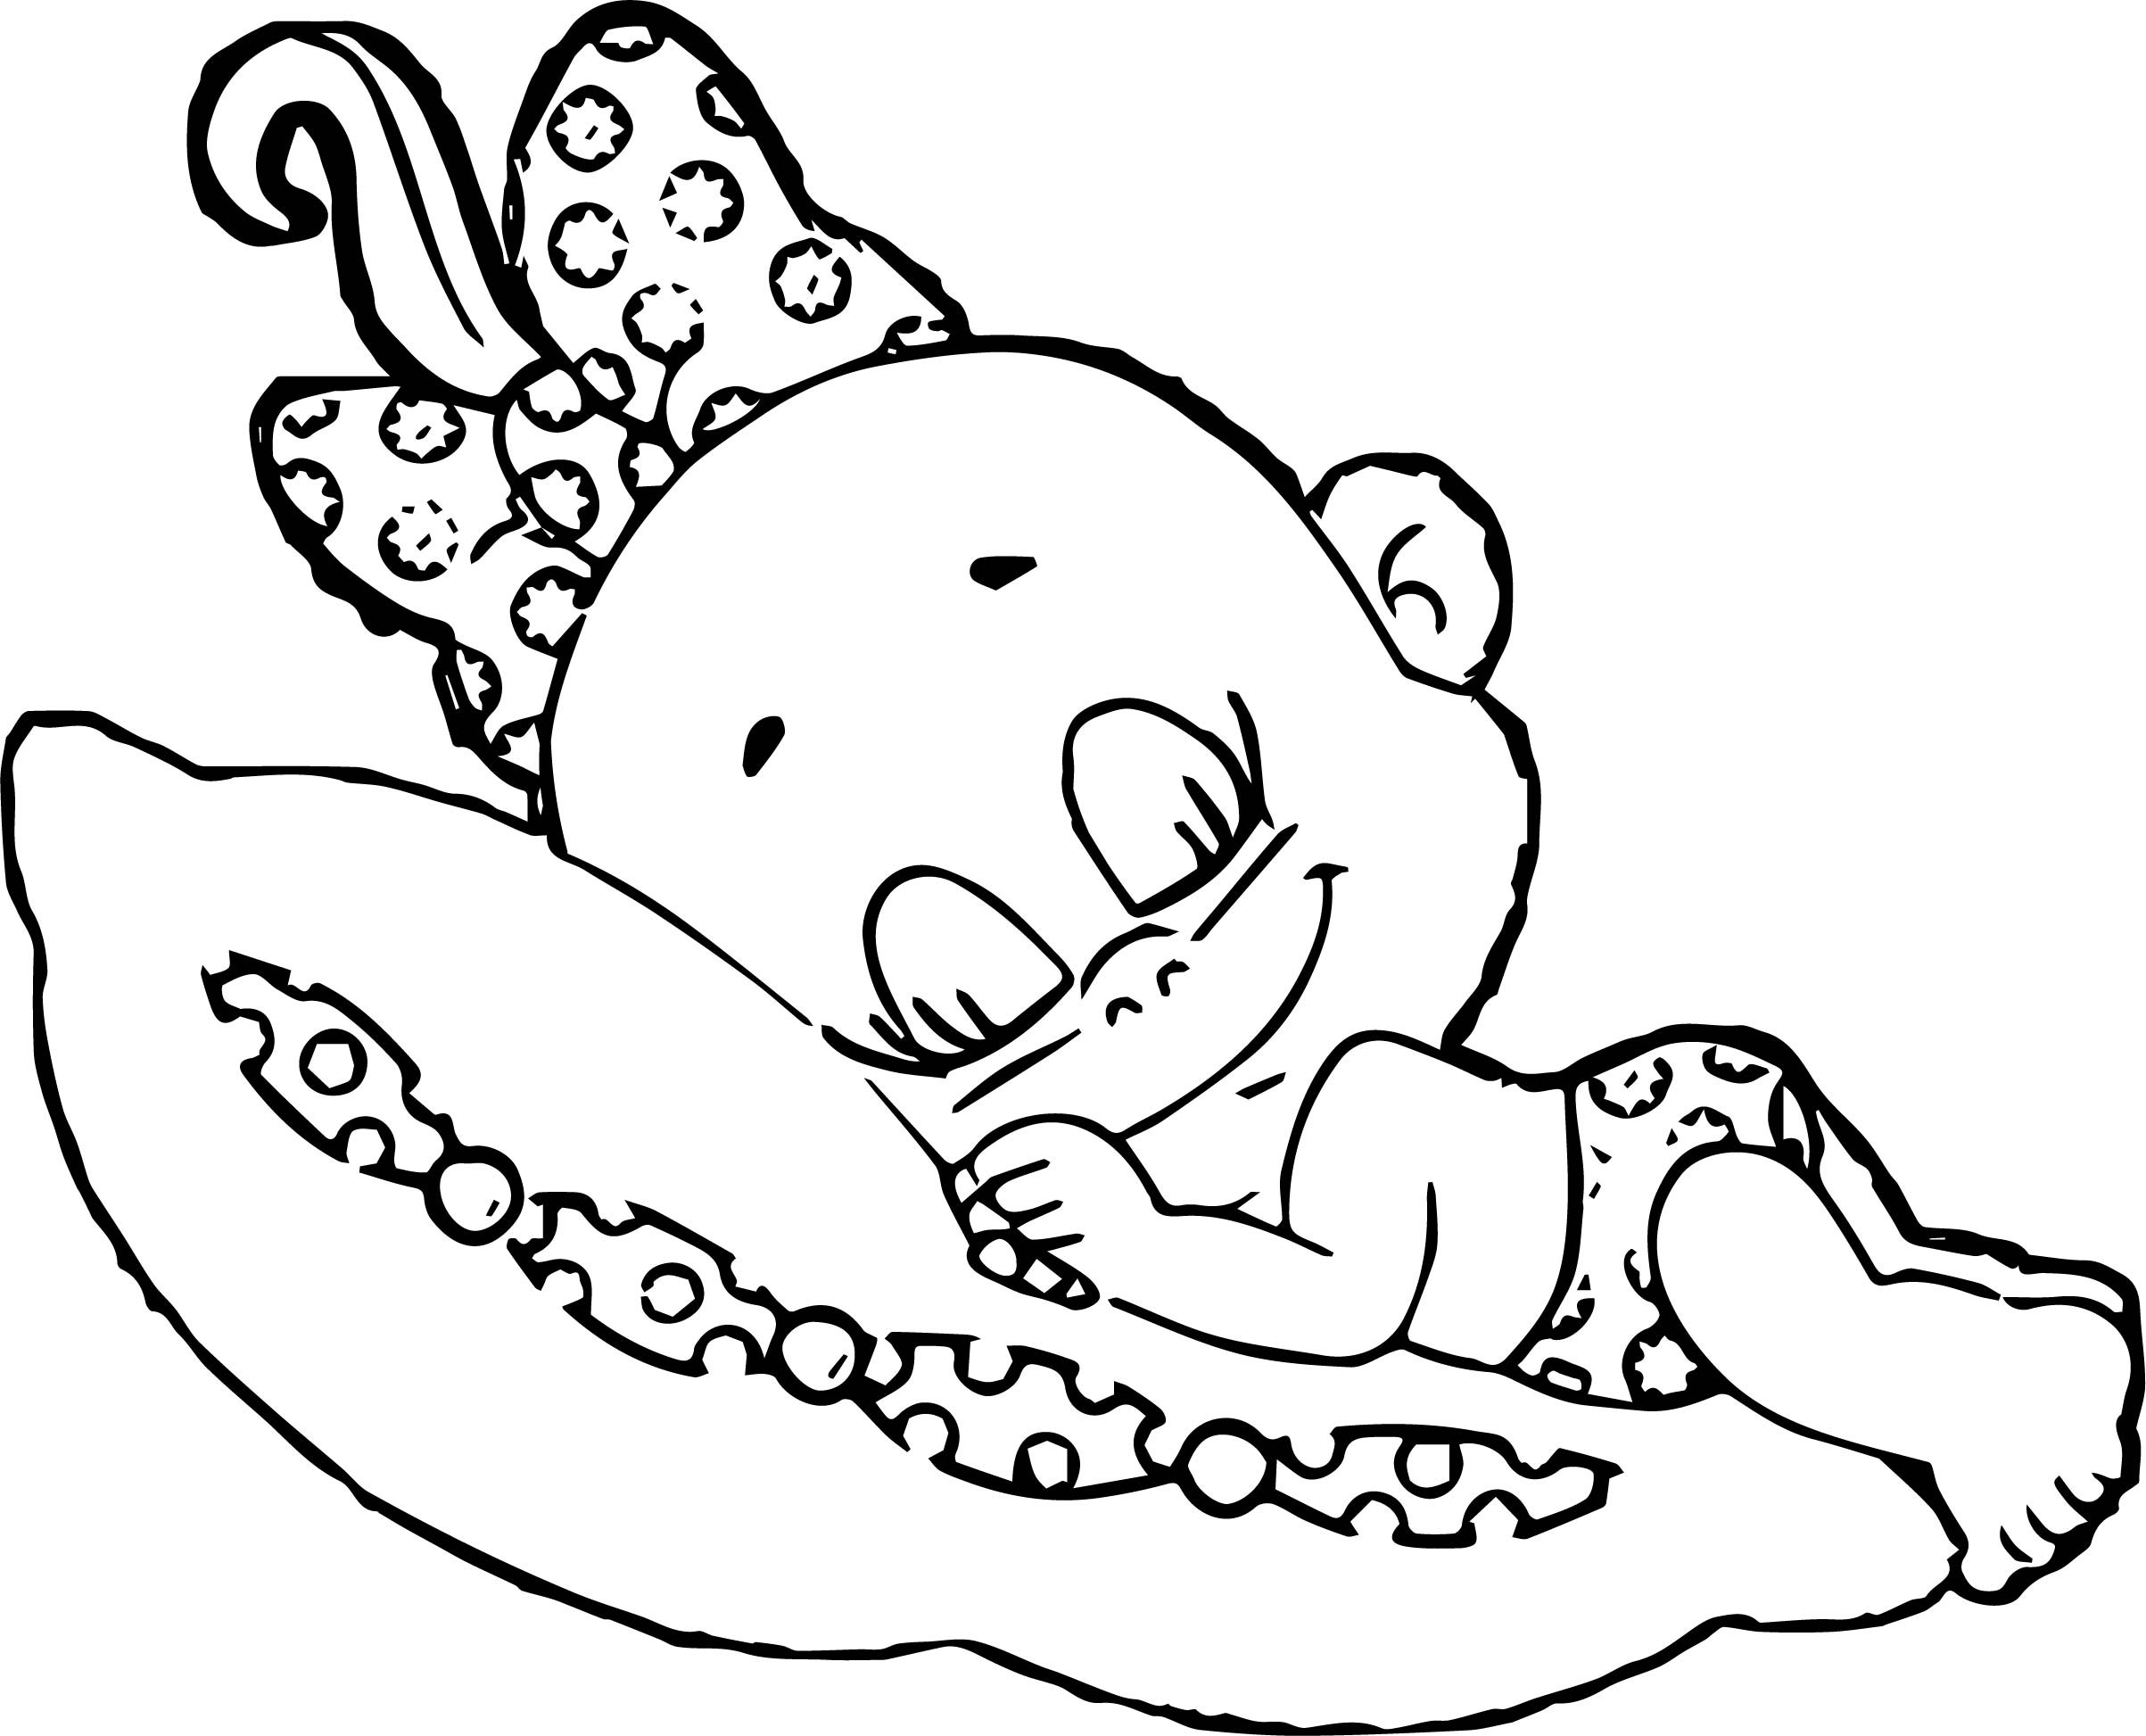 Baby Girl Coloring Page
 Baby Cartoon Girl Coloring Page